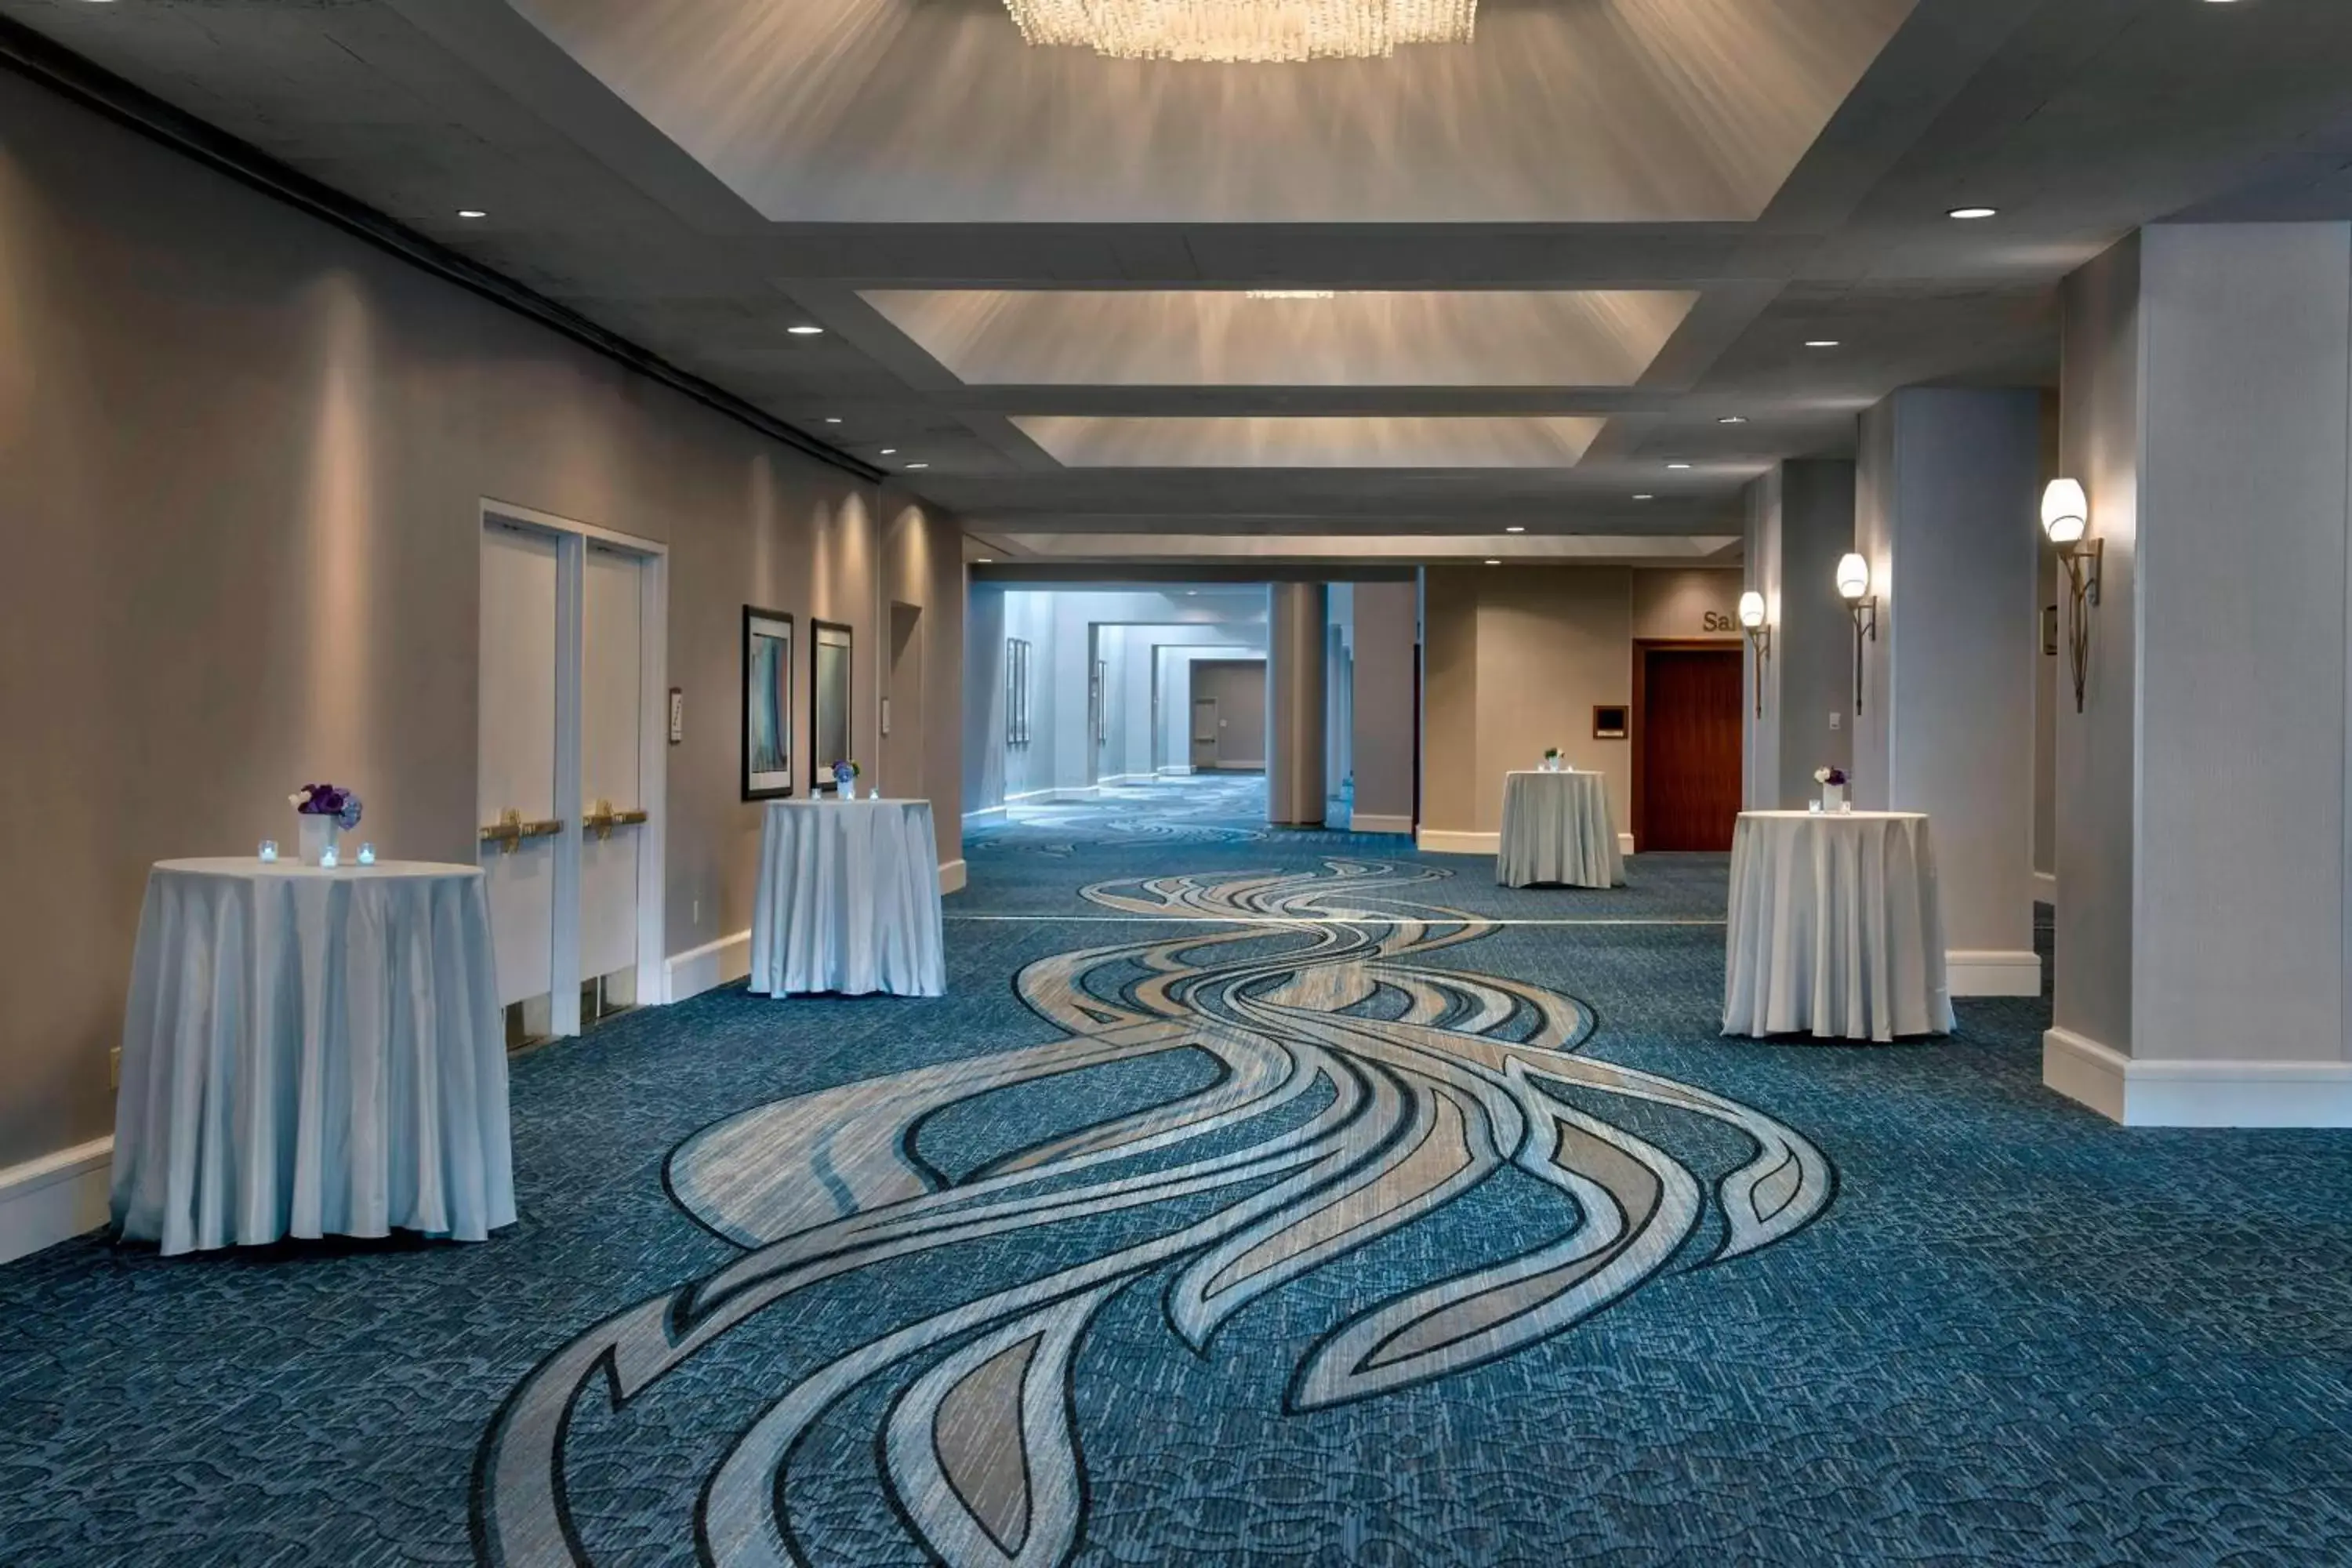 Meeting/conference room, Banquet Facilities in Boston Marriott Copley Place